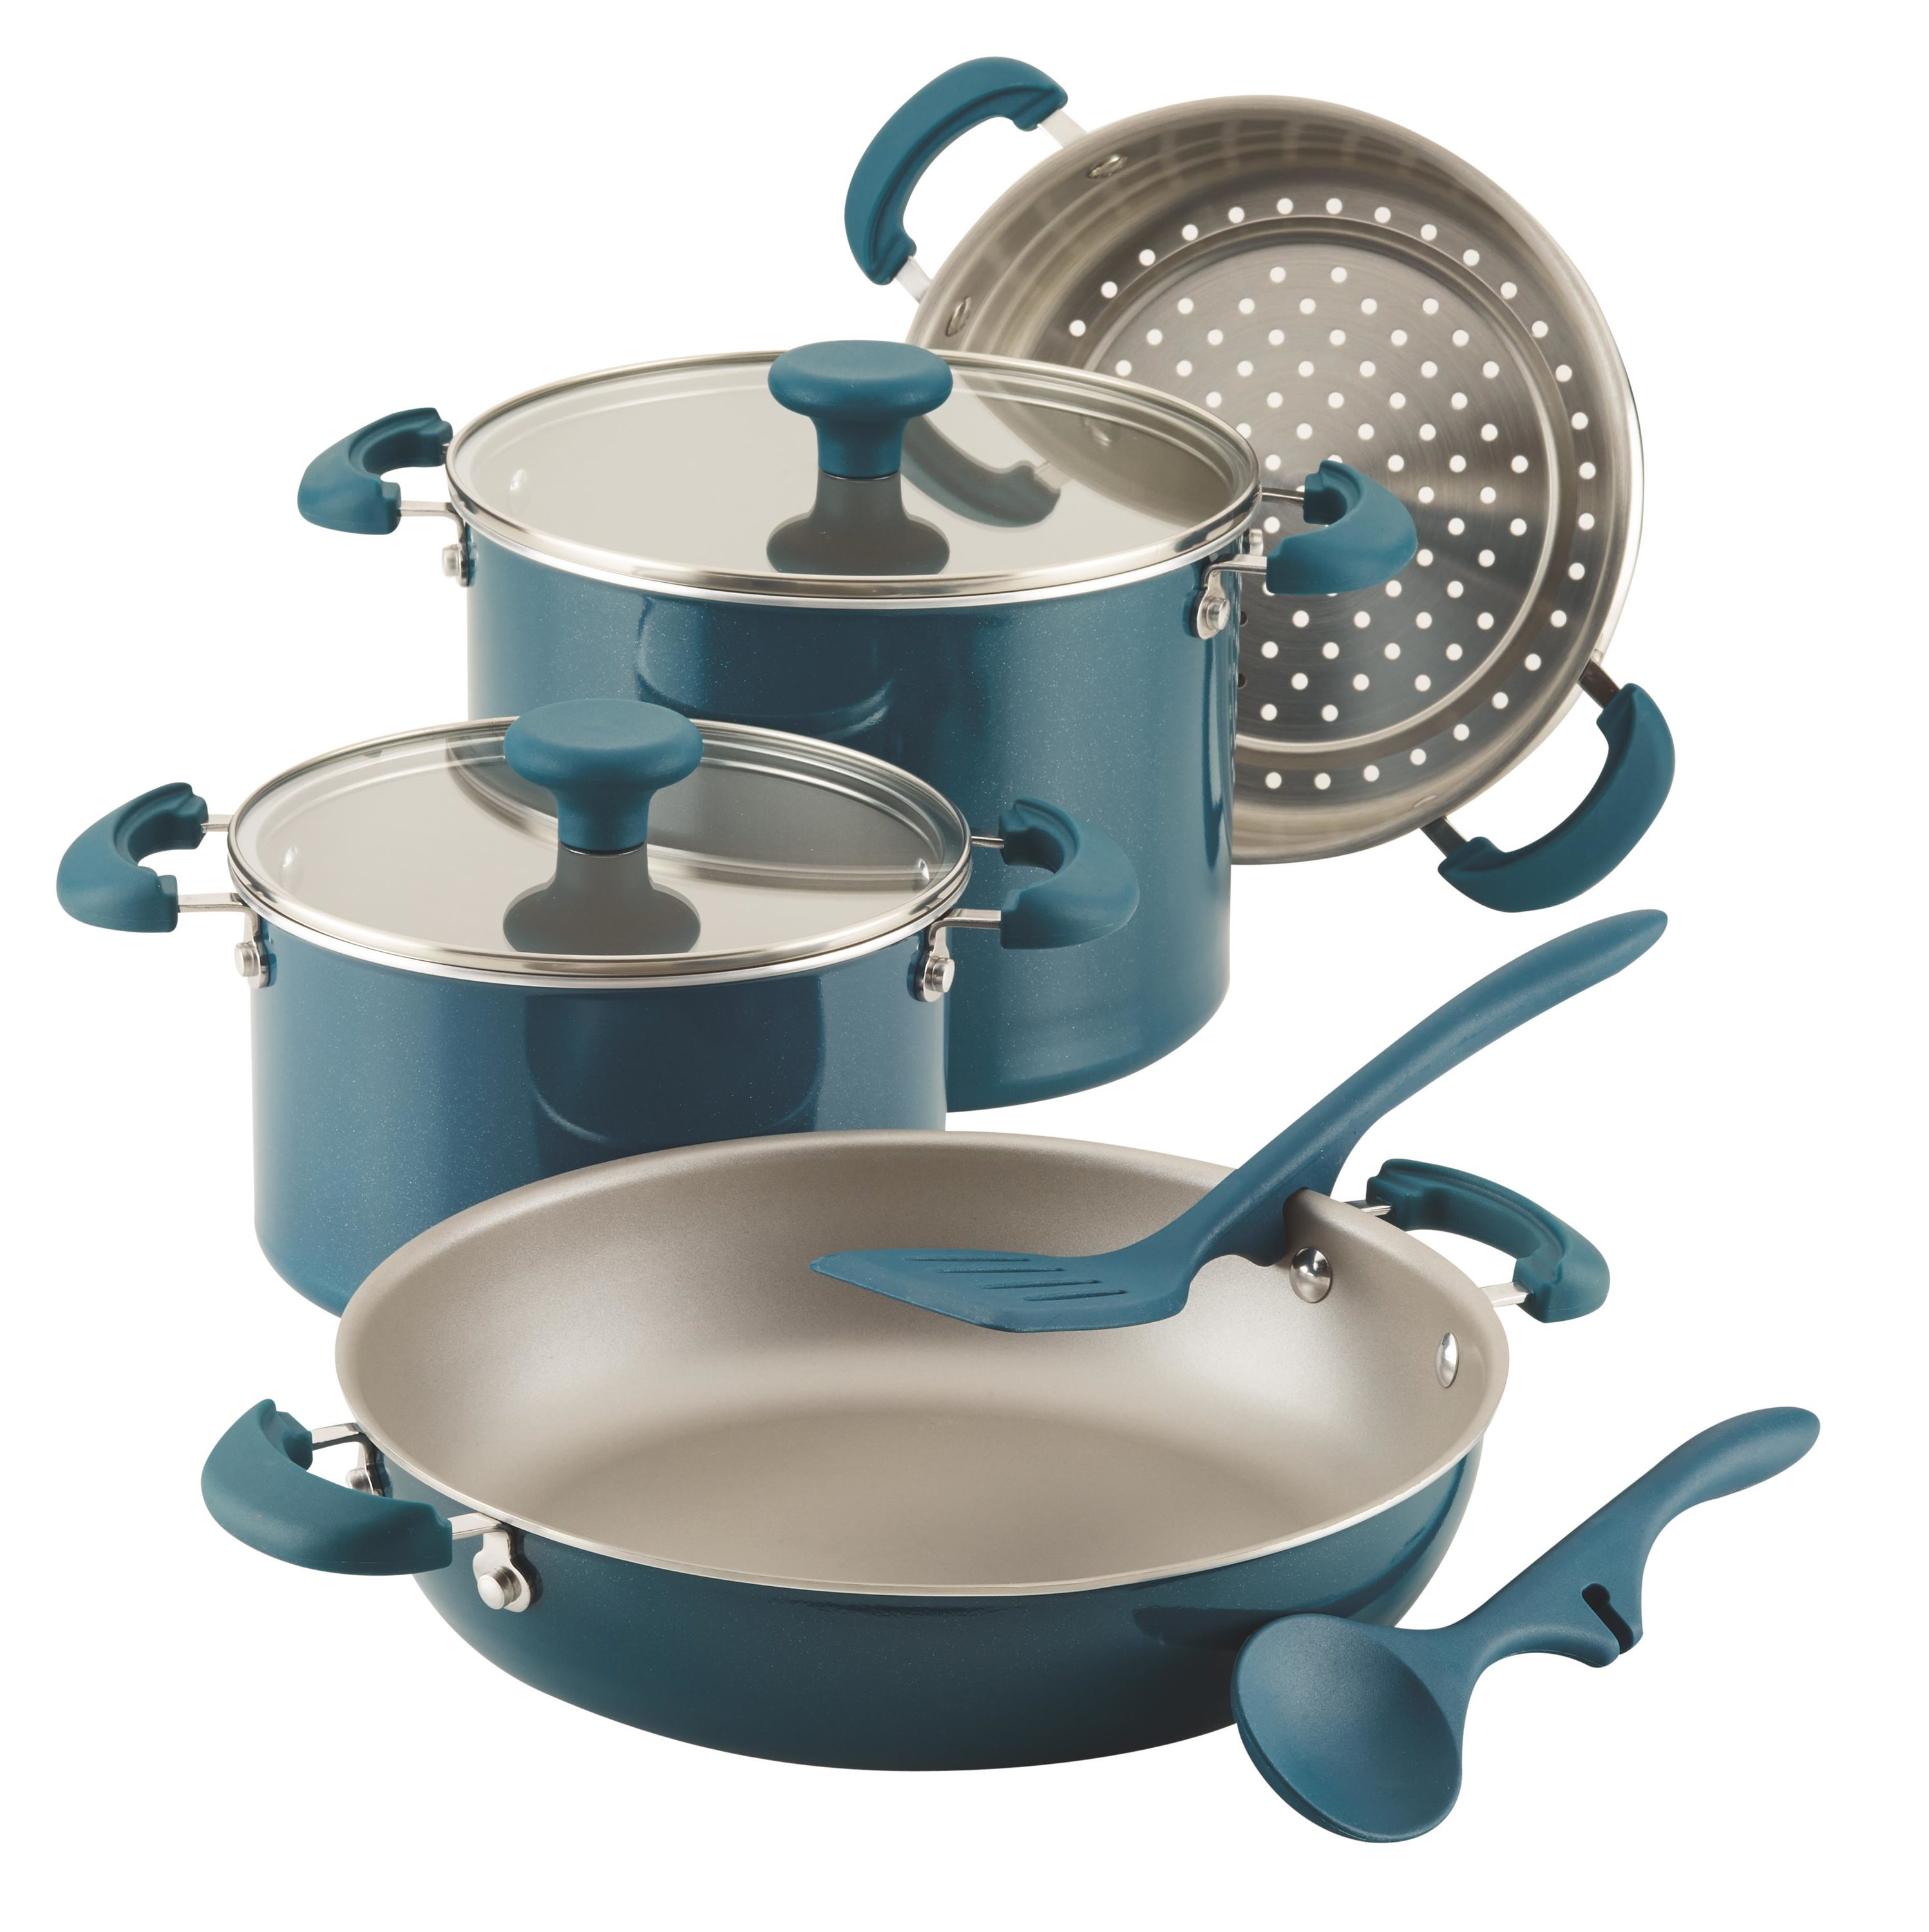 Circulon Cookware 10-Piece Nonstick Cookware Set with Bonus Slotted Turner  in Stainless Steel